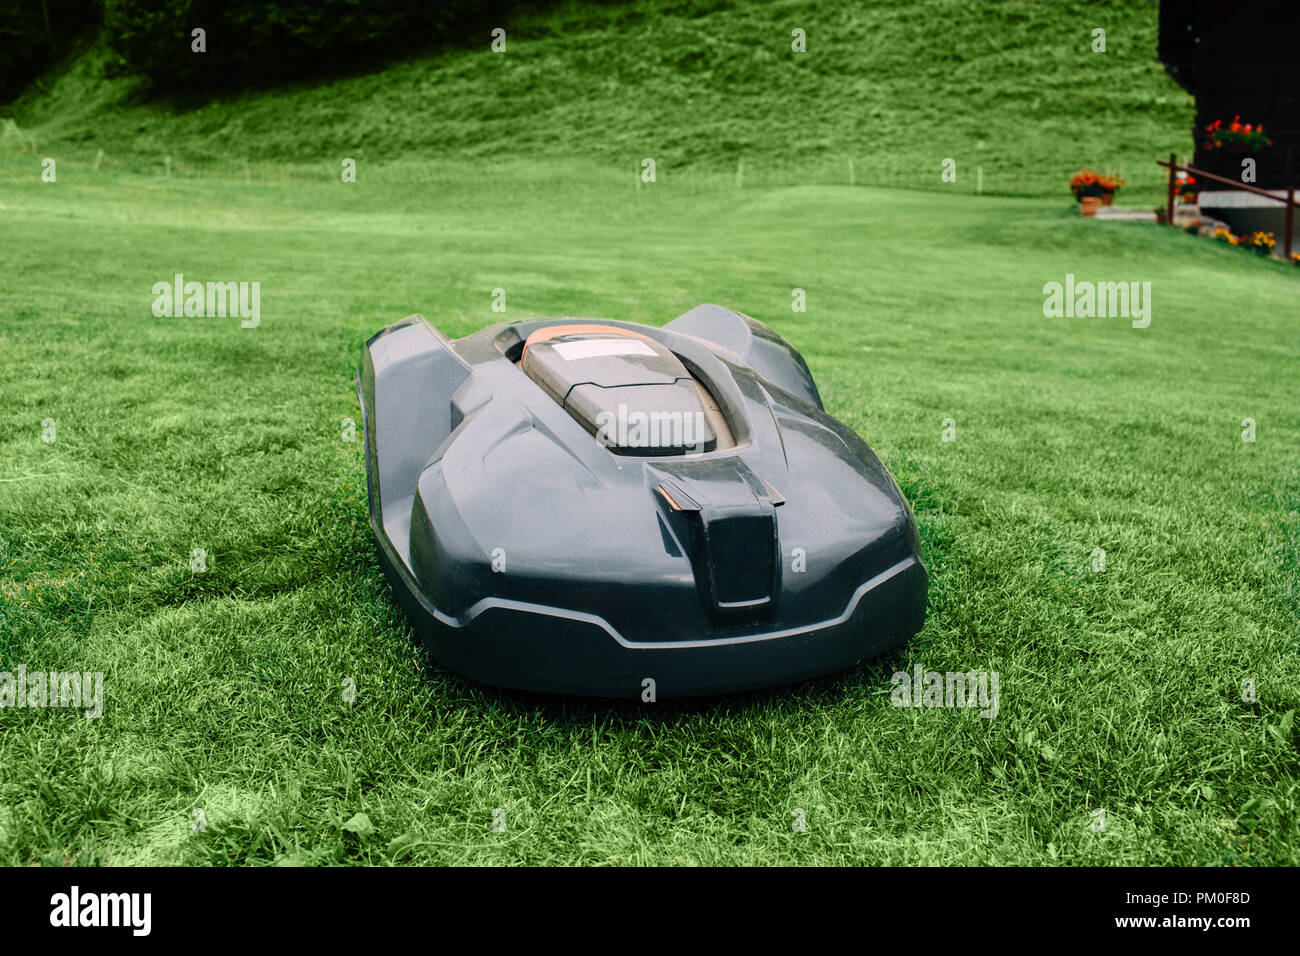 Robotic lawn mower on grass, automated lawn mower Stock Photo